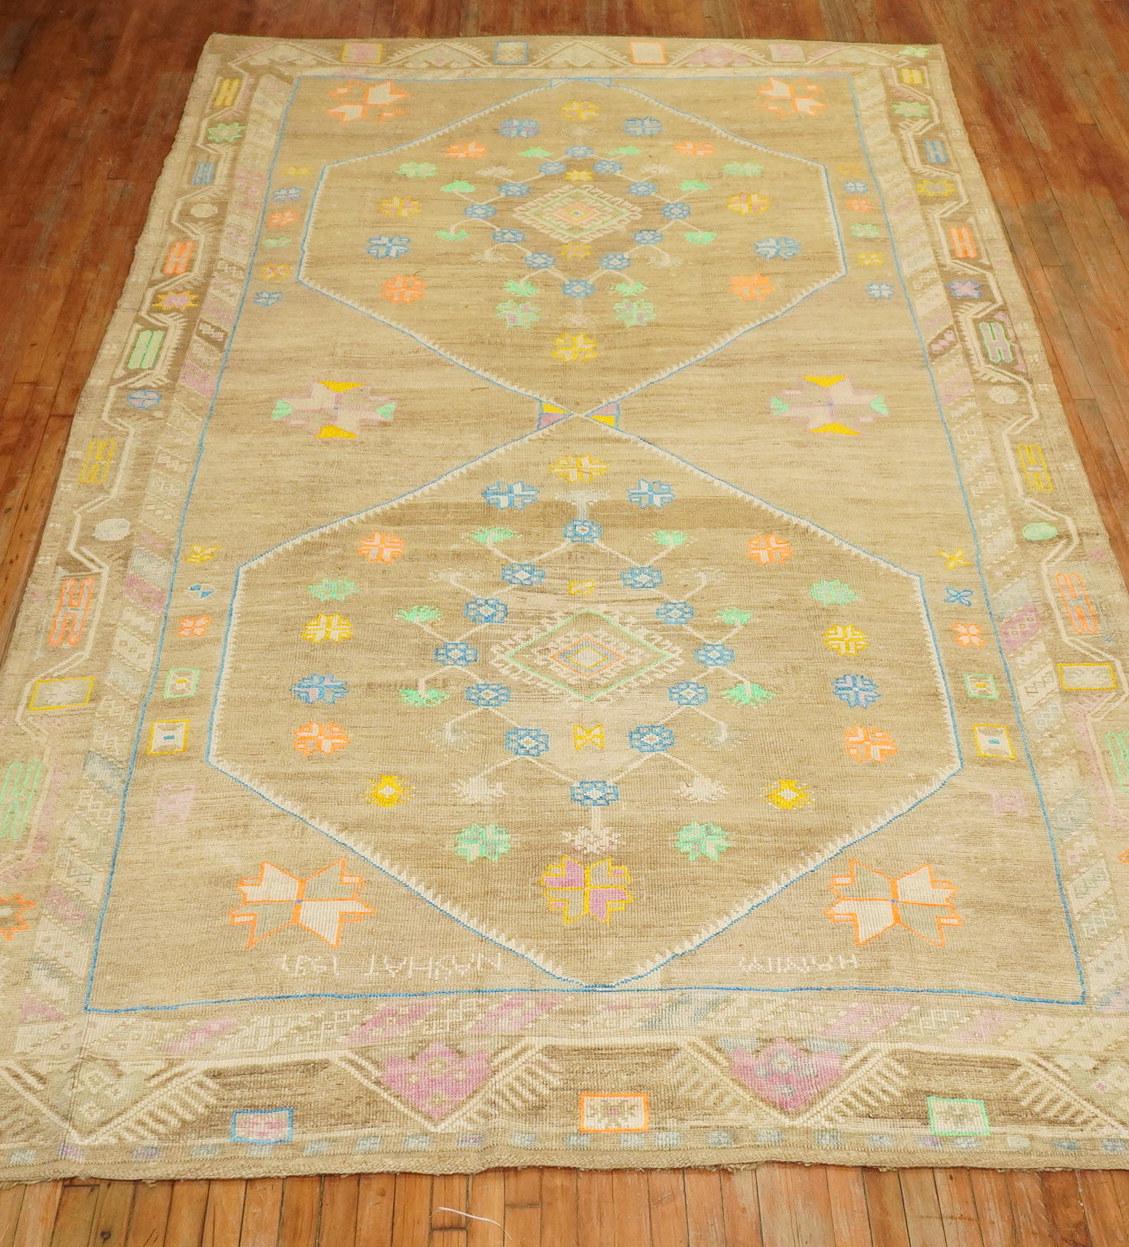 A one of a kind Boutique looking hand knotted room size vintage Turkish Kars rug featuring bright cotton accents in orange, yellow, lavender blue and neon green on a brown fieldhovered by 2 large geometric medallions. The accent colors were